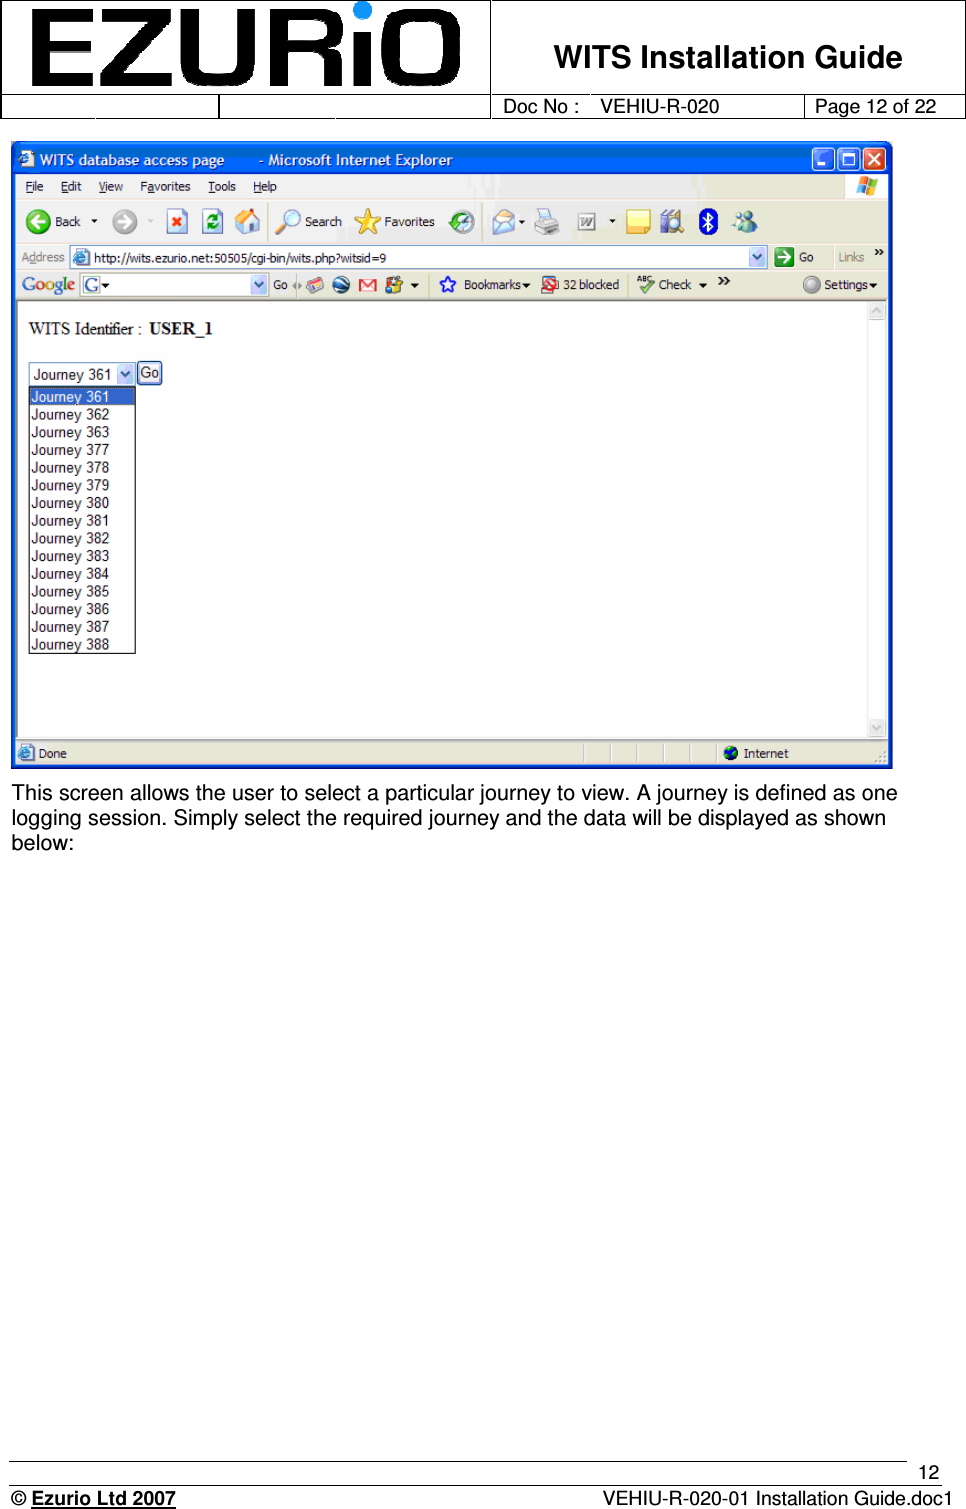    WITS Installation Guide         Doc No : VEHIU-R-020 Page 12 of 22      © Ezurio Ltd 2007  VEHIU-R-020-01 Installation Guide.doc1 12  This screen allows the user to select a particular journey to view. A journey is defined as one logging session. Simply select the required journey and the data will be displayed as shown below:    